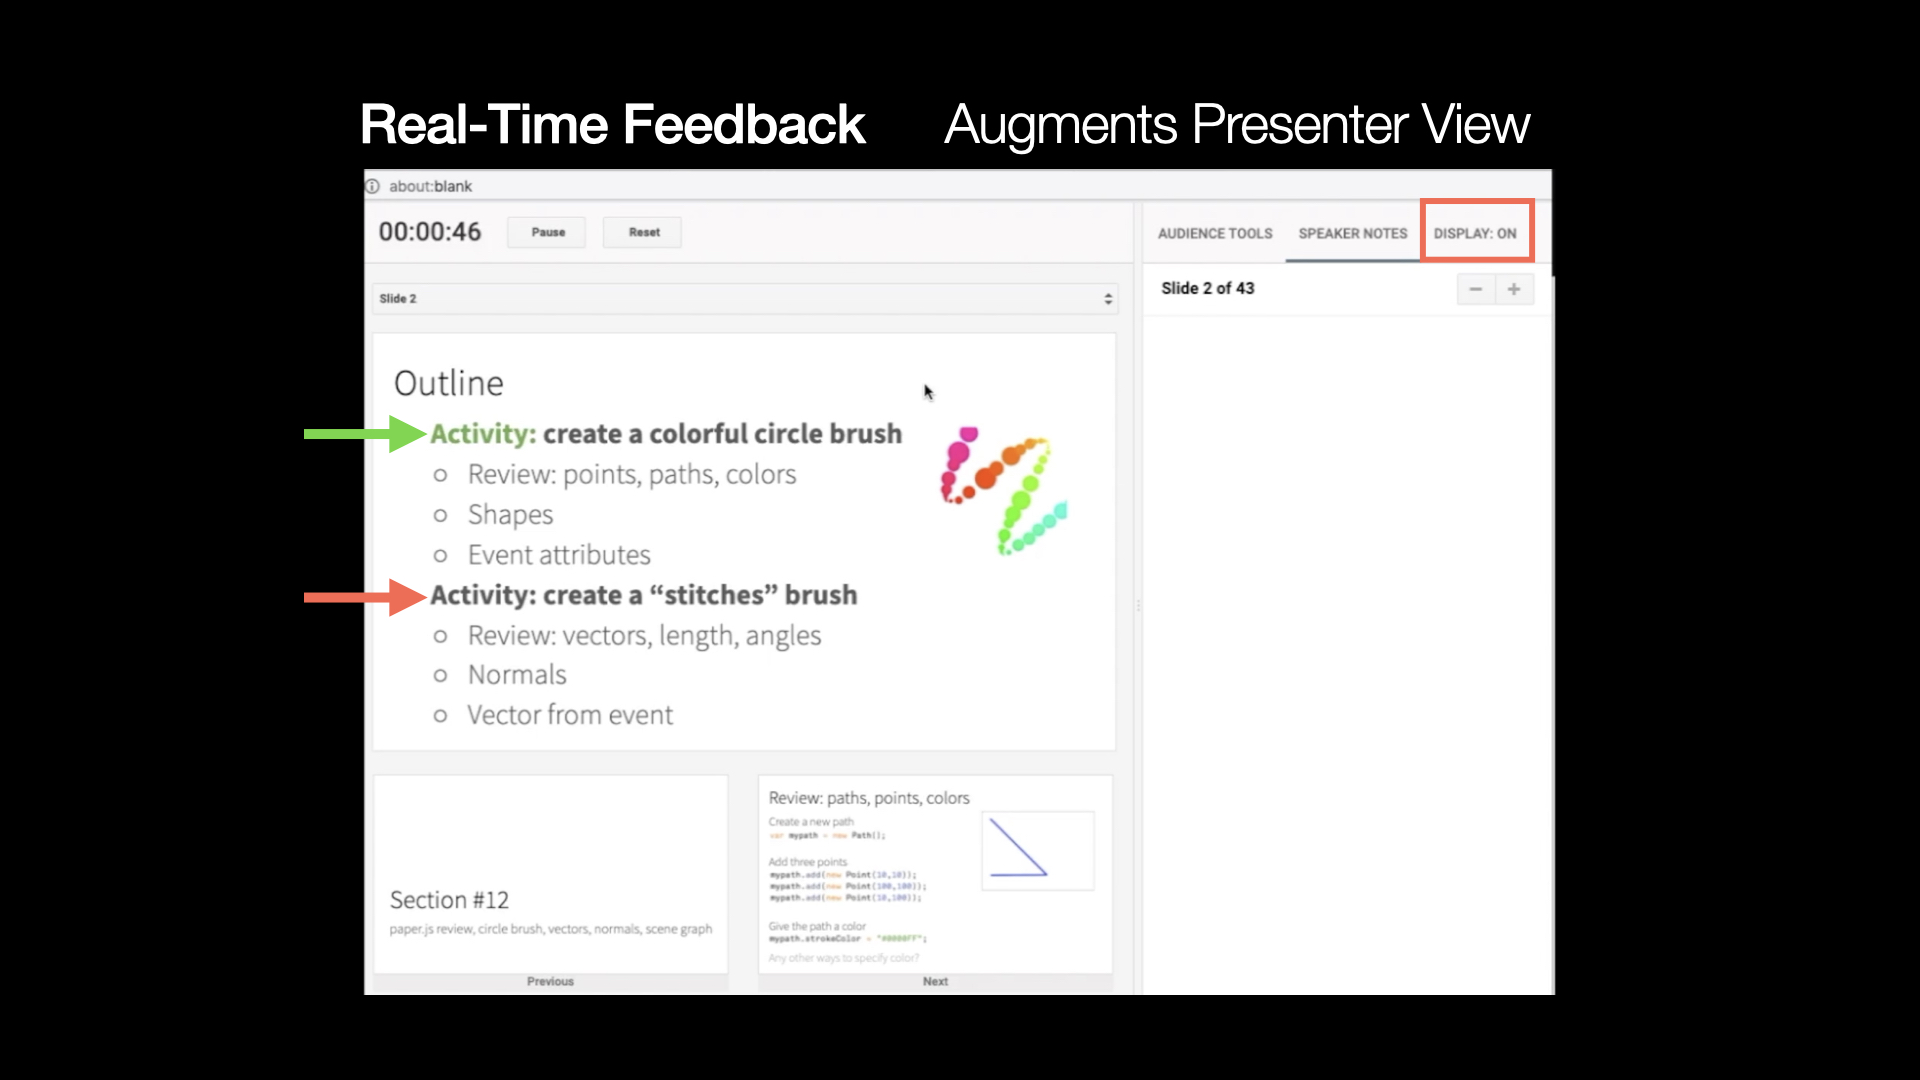 This is the slide that shows the demo clip of our real-time feedback interface.  On the top of the slide are text “Real-Time Feedback” and text “Augments Presenter view”. Below it is the presenter view of Google Slides, including the timer, the buttons for switching to the previous or next slides, the current slide content, the previewed content of previous and next slides, and the speaker notes section. The animation first showed a green arrow pointing to the word “Activity” colored in green within current slide content, which demonstrated the mentioned word was highlighted, and a red arrow pointing to another unmentioned word “Activity” which was not highlighted. The played clip then demonstrated when speakers said “create a colorful circle brush” and depicting the image of a colorful squiggly line, the corresponding words were highlighted in green and the image was highlighted with a green border.  The text “display: on” in the speaker note section then be marked with a red border to show the feedback can be turned on or off.